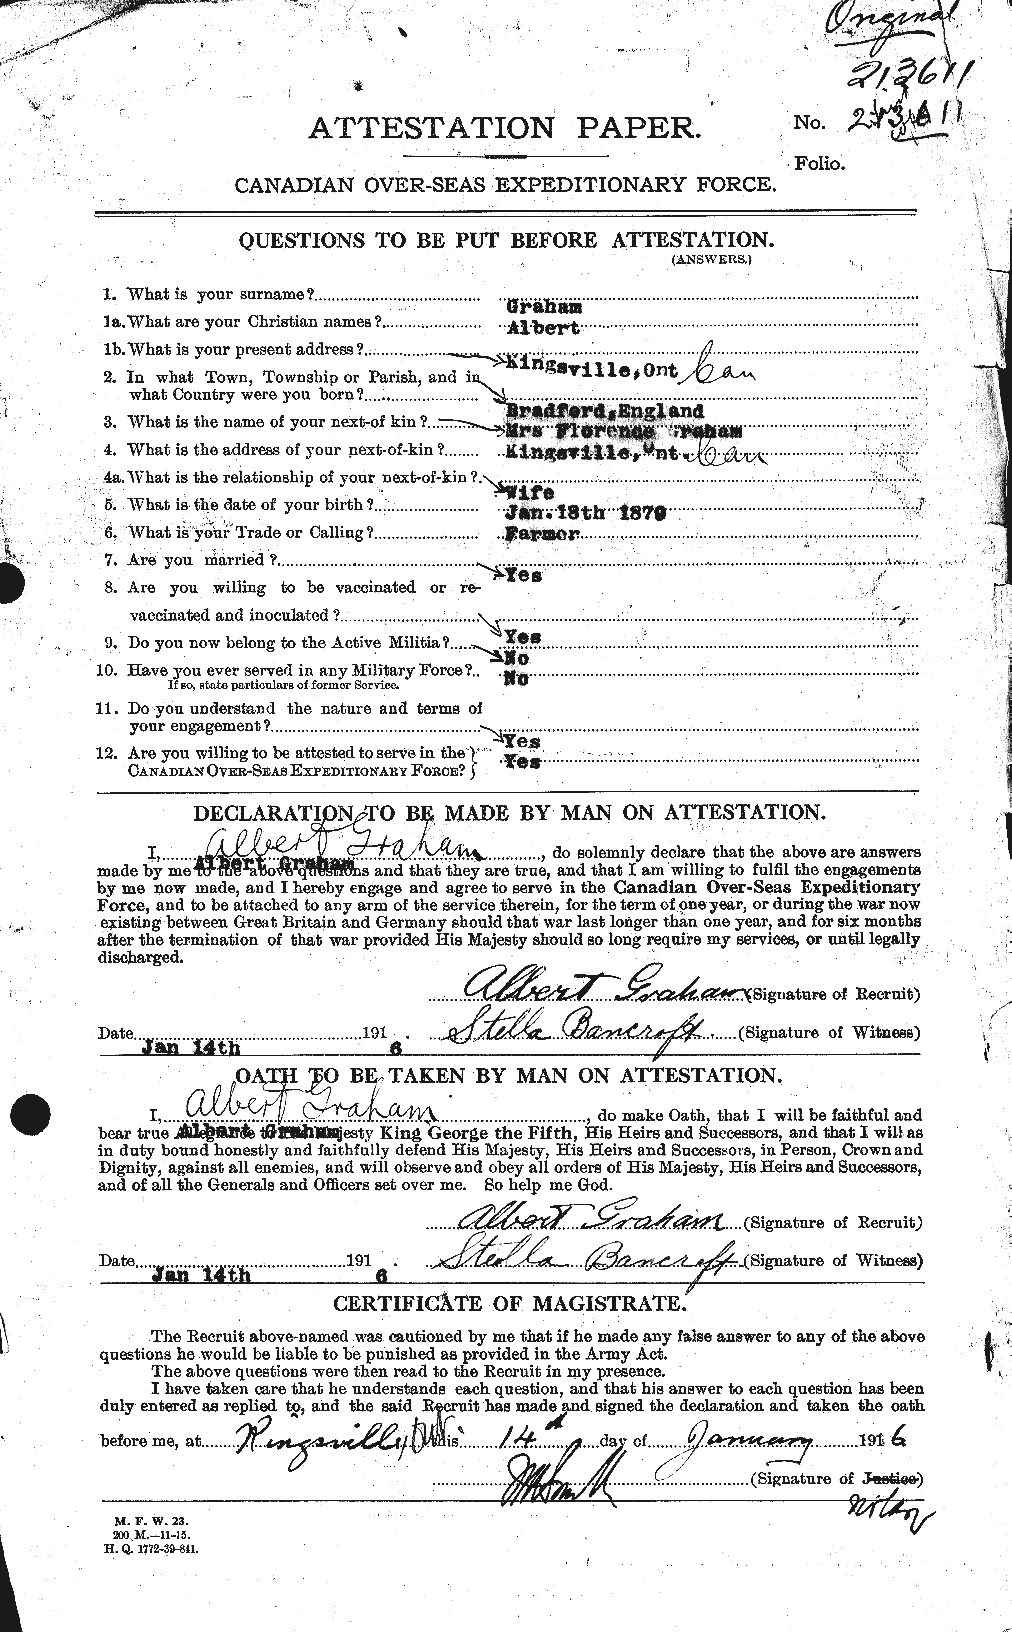 Personnel Records of the First World War - CEF 359566a